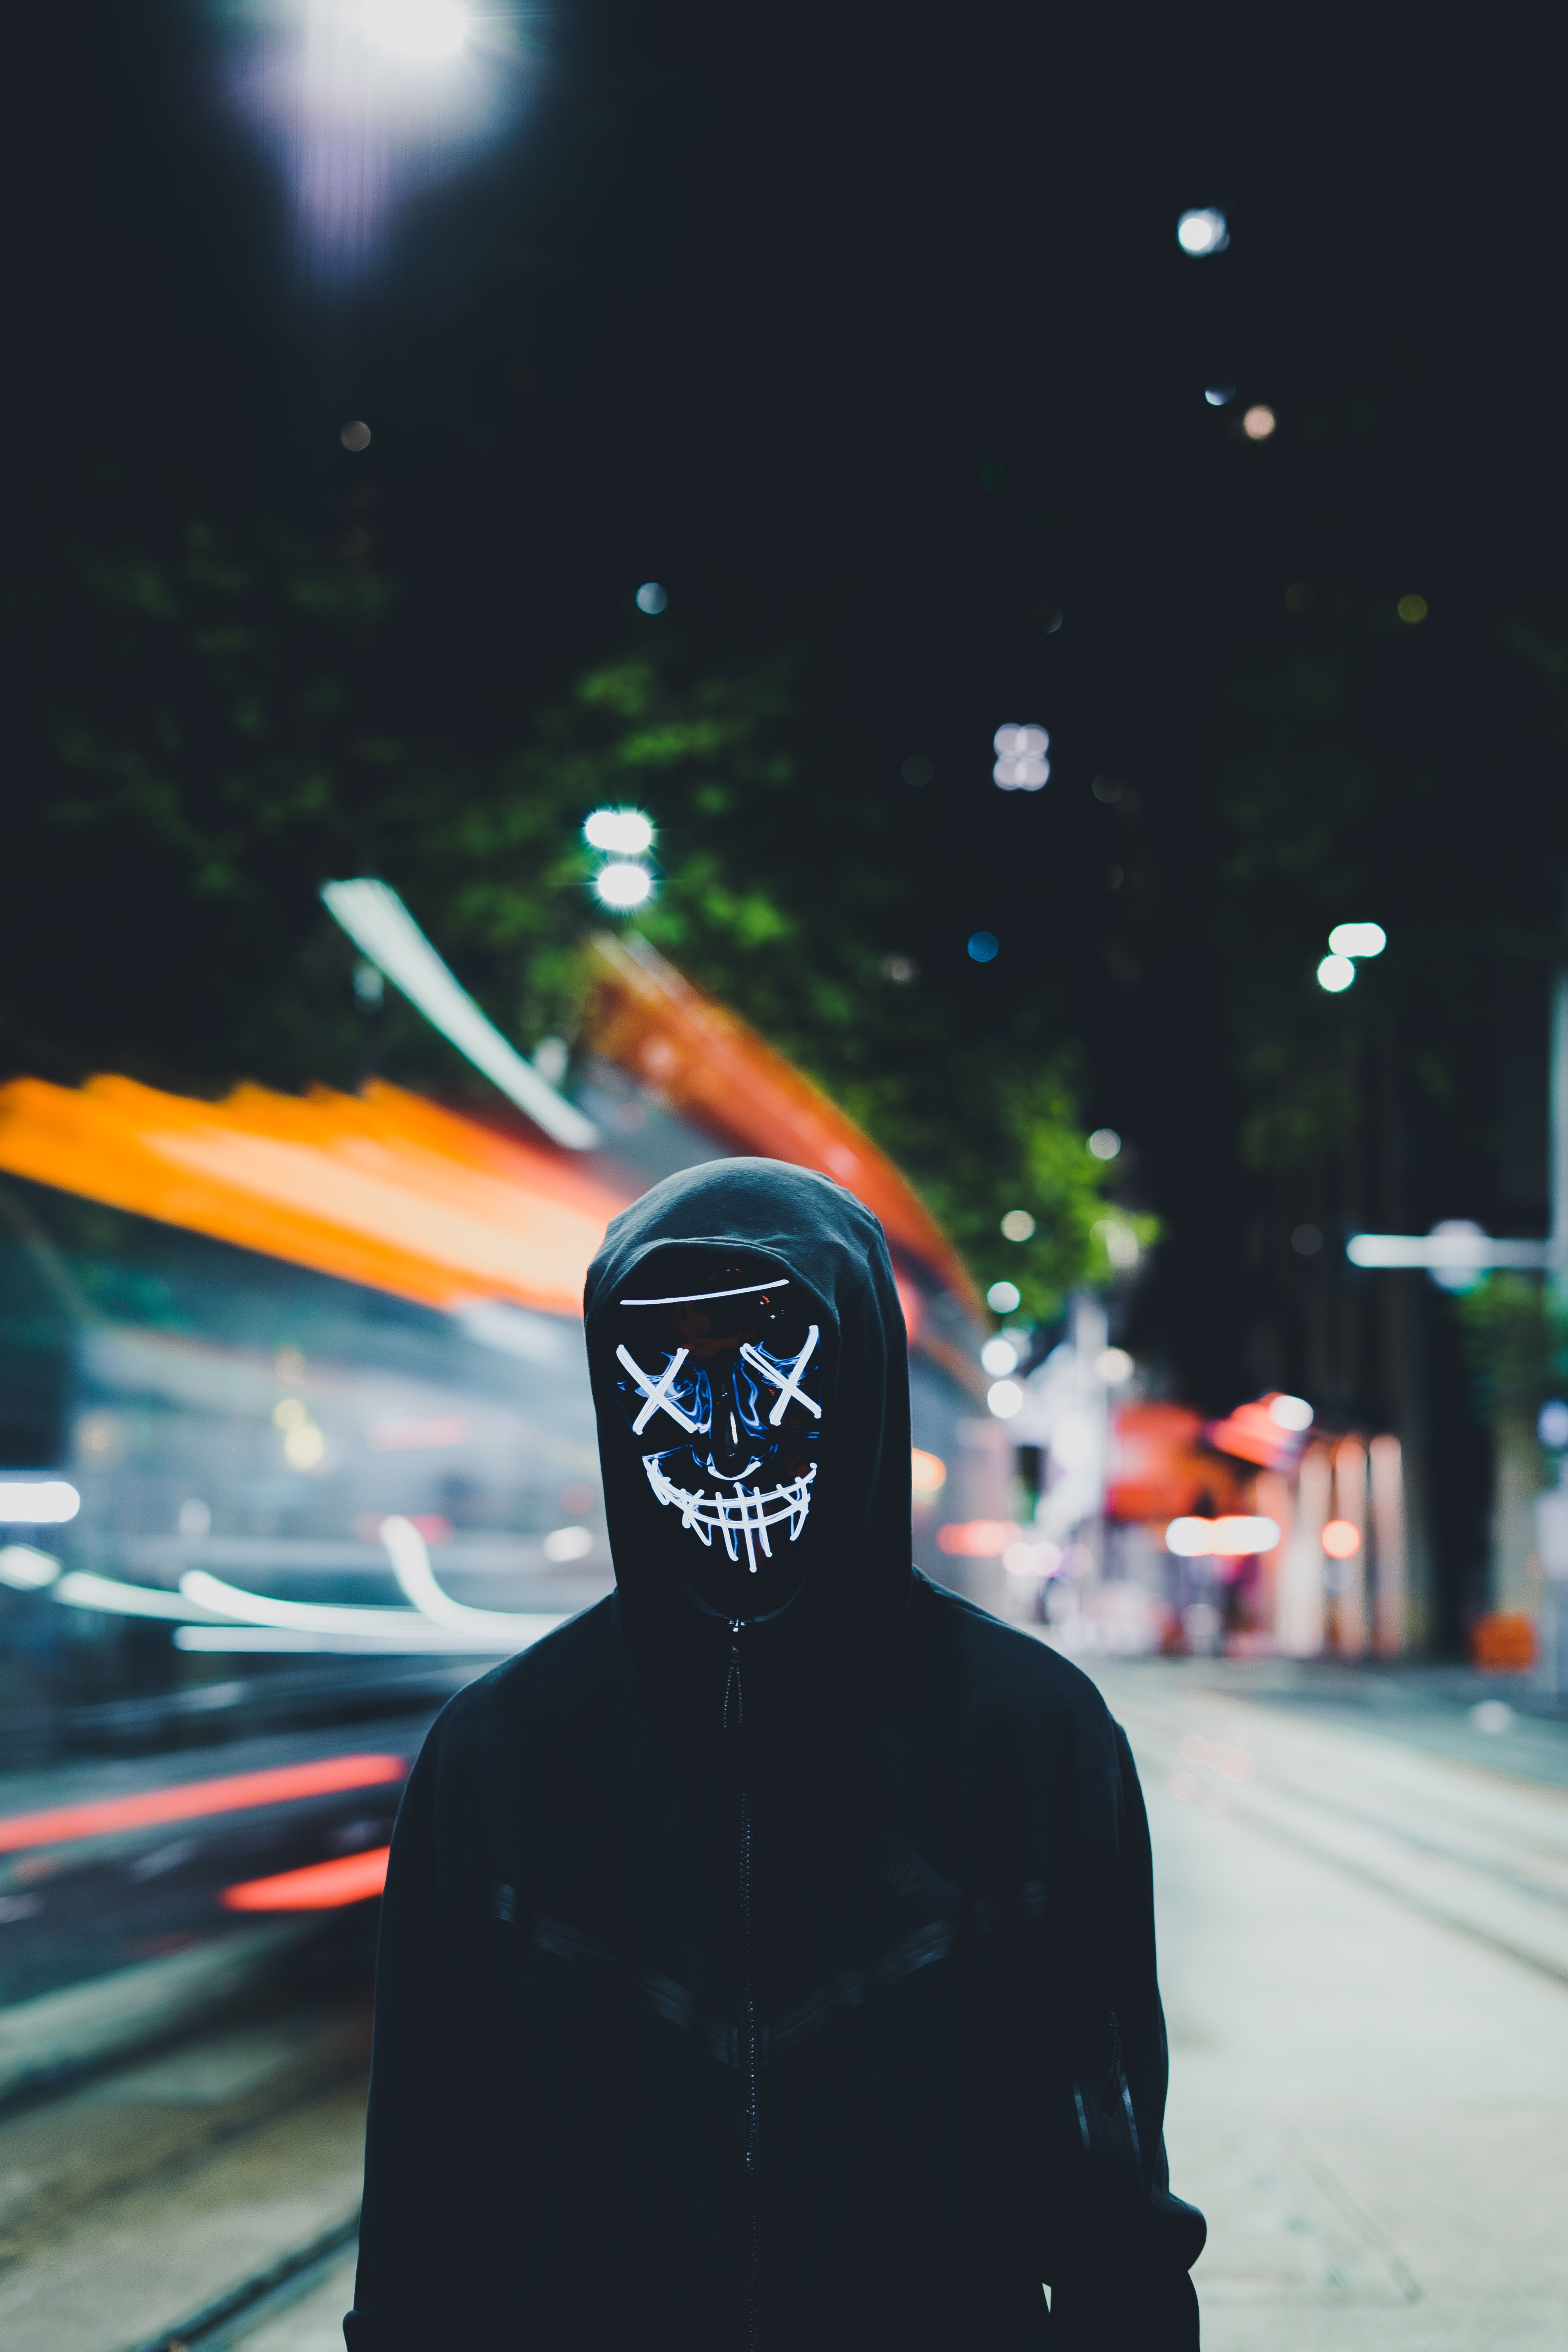 Persons in Mask 4K Wallpaper, Neon Mask, Black Hoodie, Anonymous, 5K, Photography